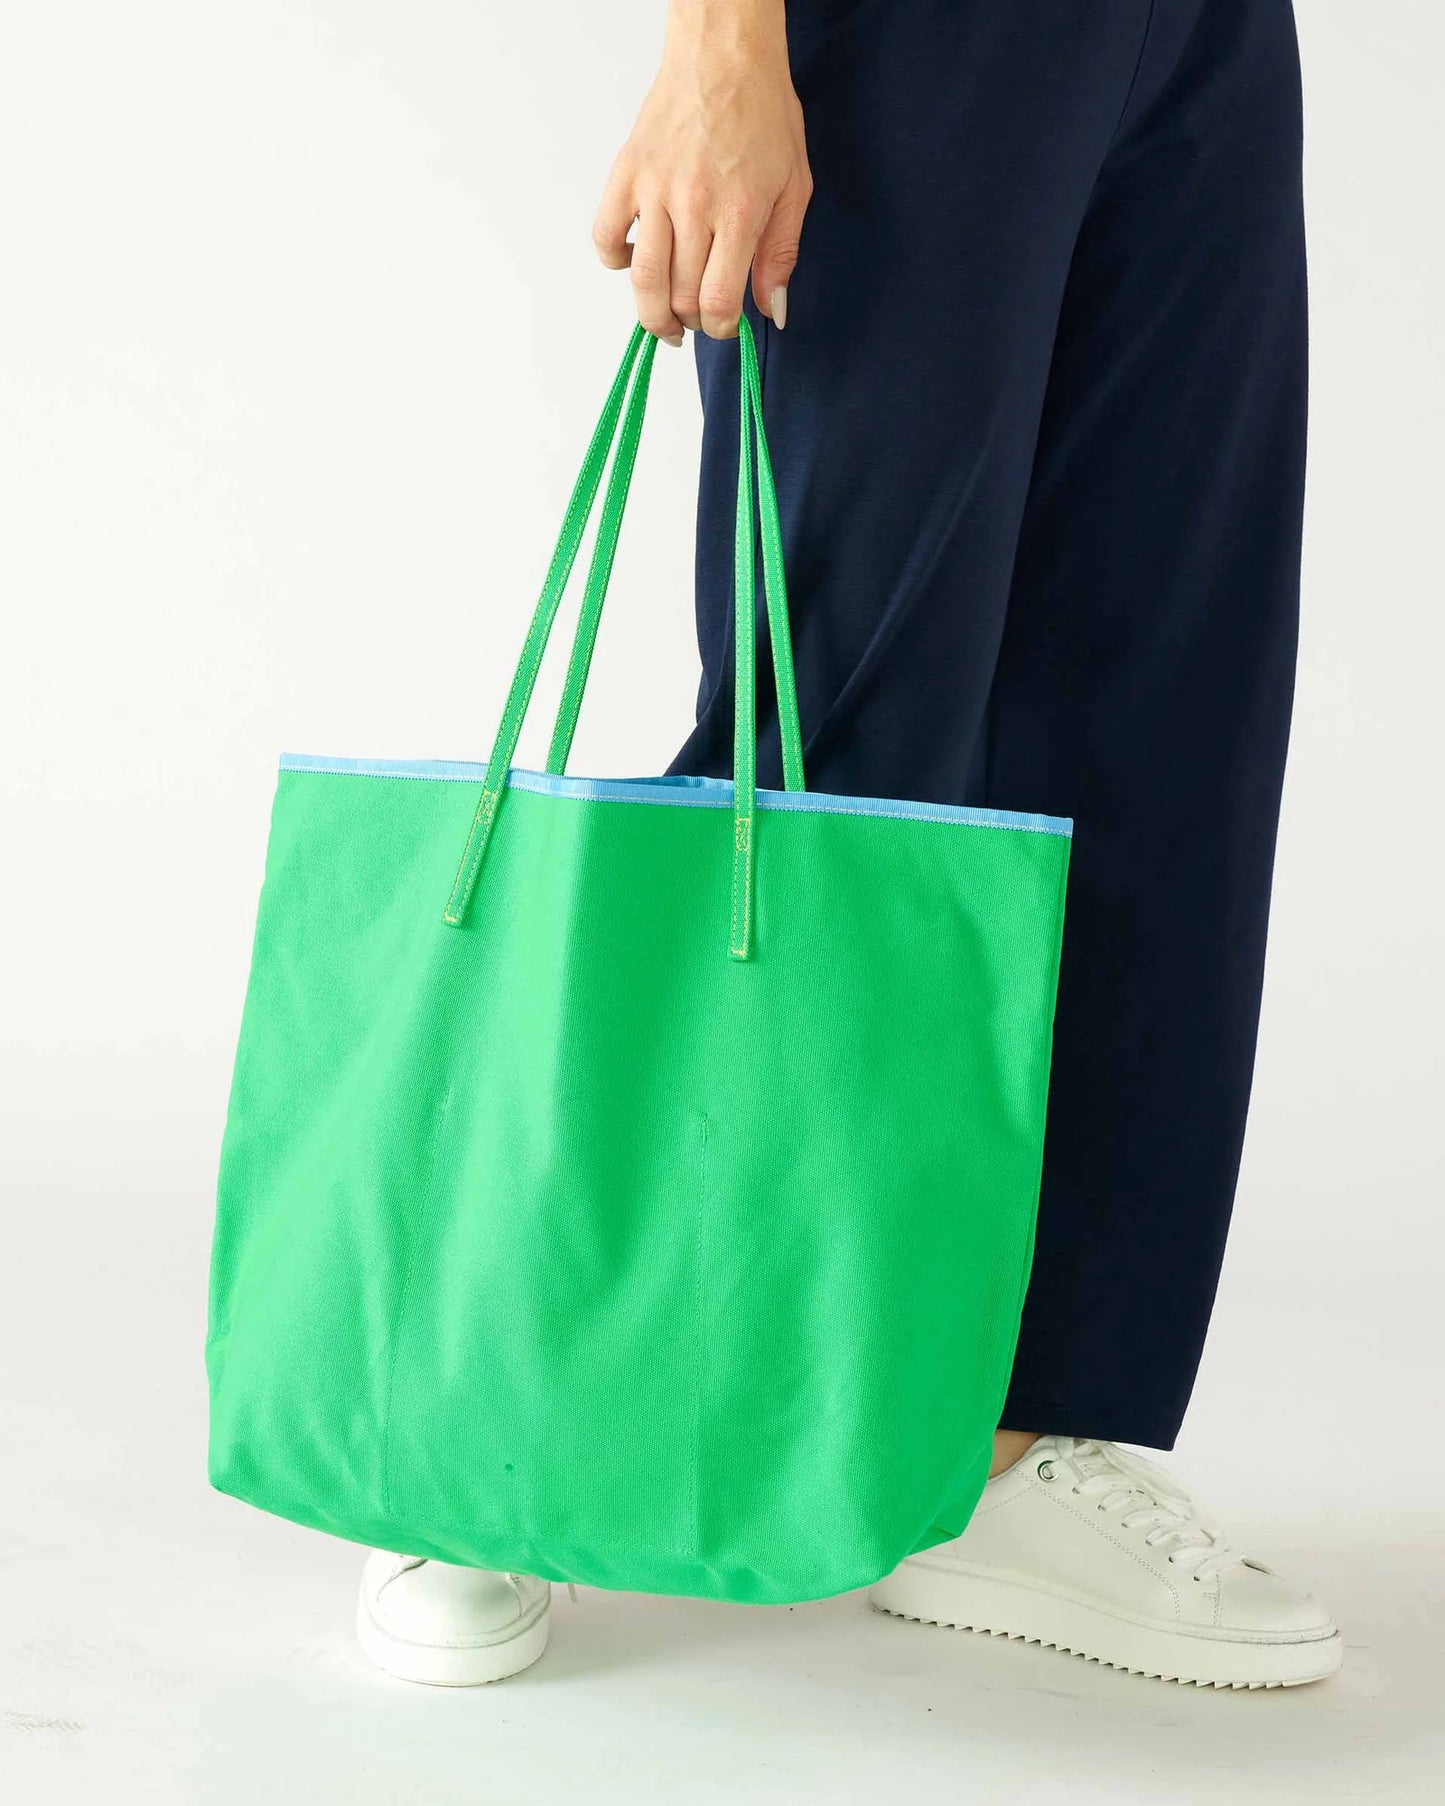 Le Canvas Tote in Kelly Green